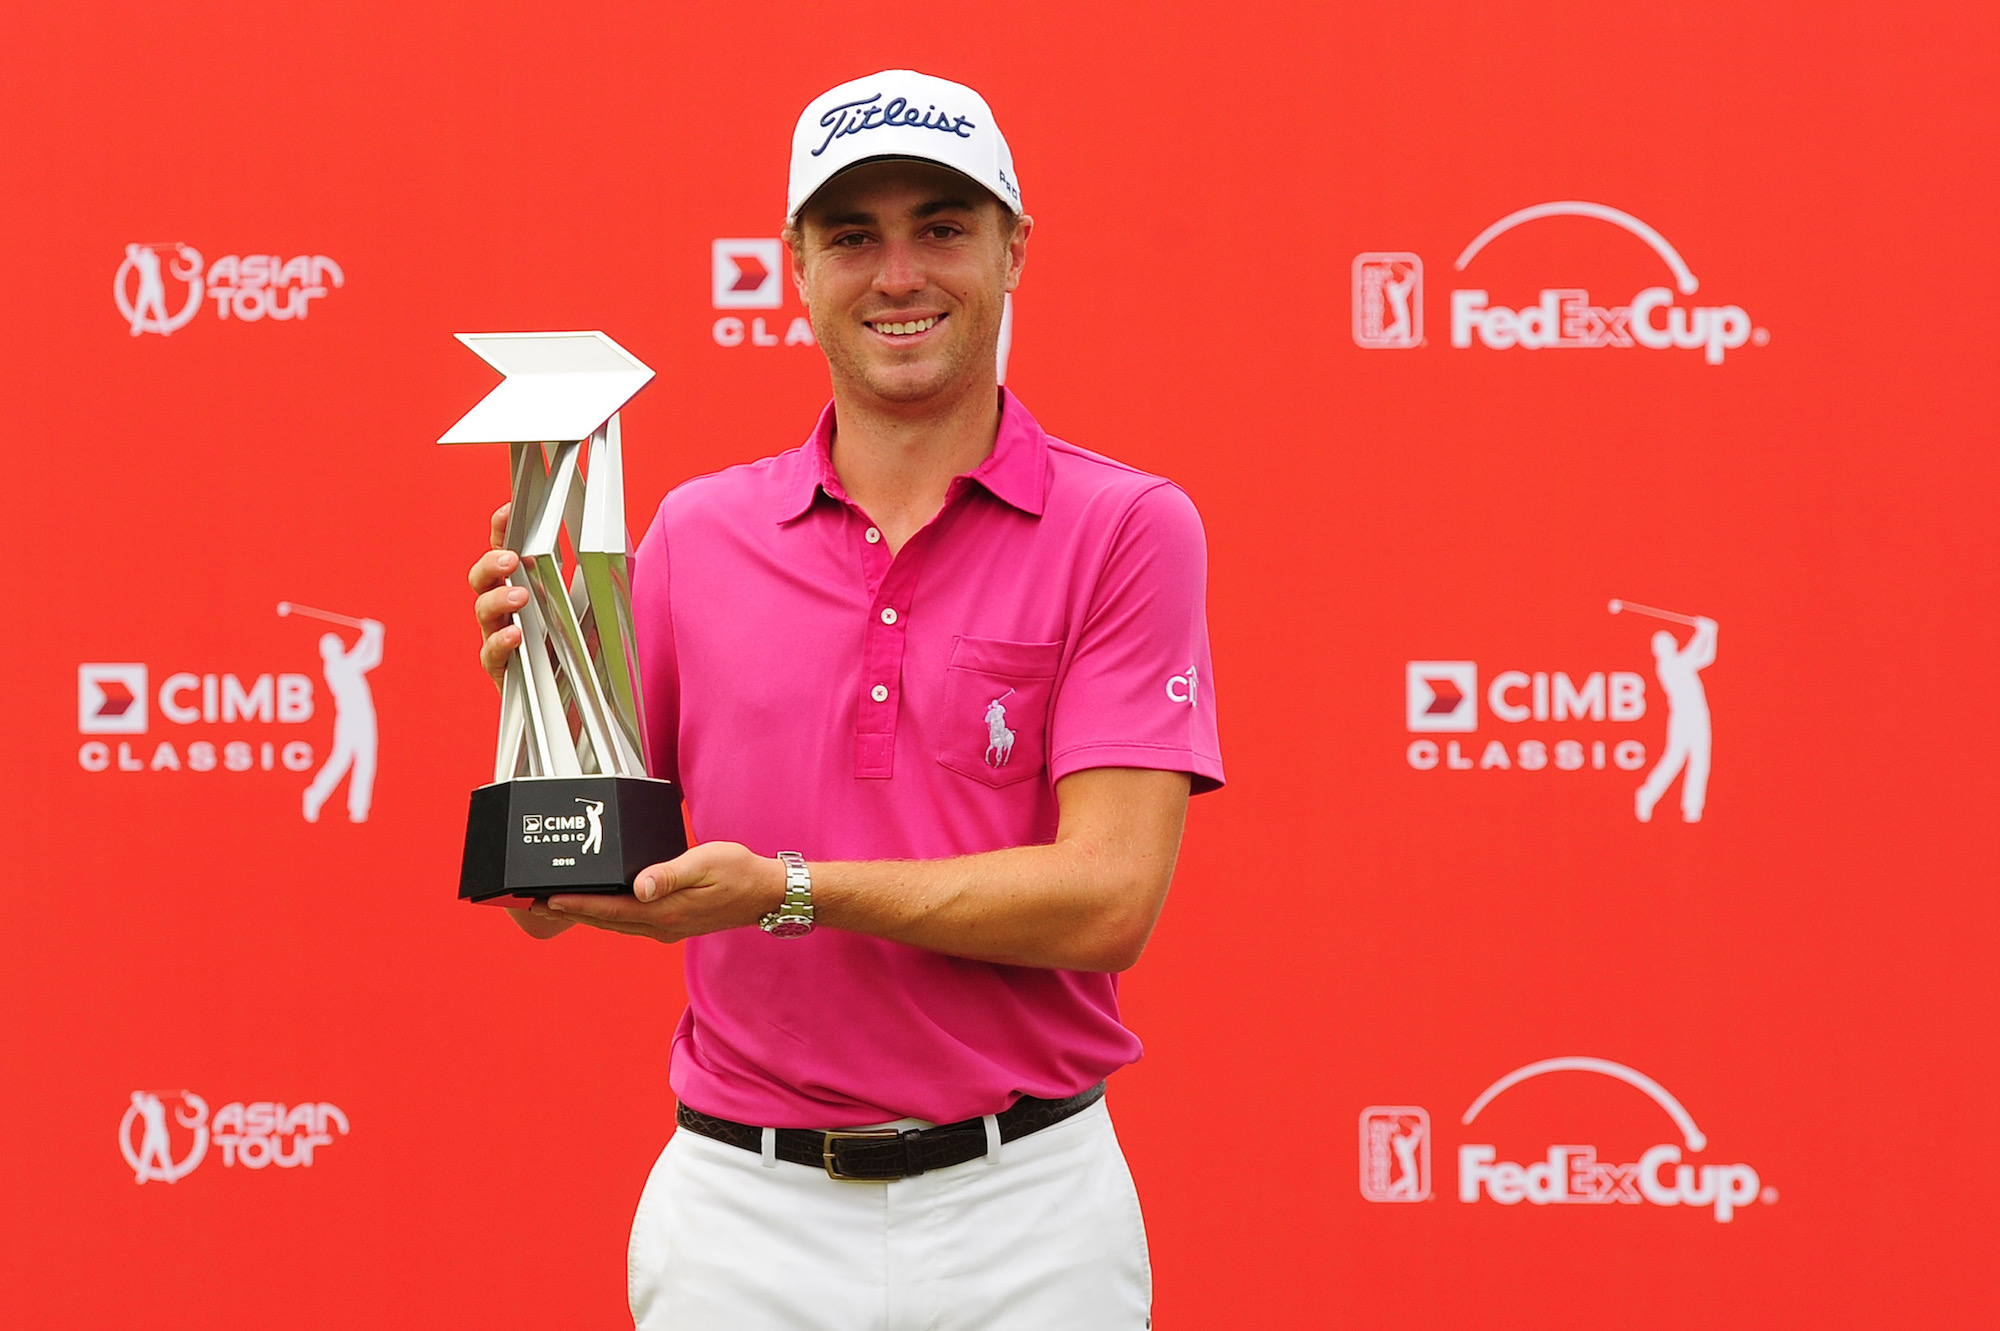 TWO-TIME DEFENDING CIMB CLASSIC CHAMPION AND PGA CHAMPIONSHIP WINNER JUSTIN THOMAS SET TO DEFEND TITLE IN OCTOBER